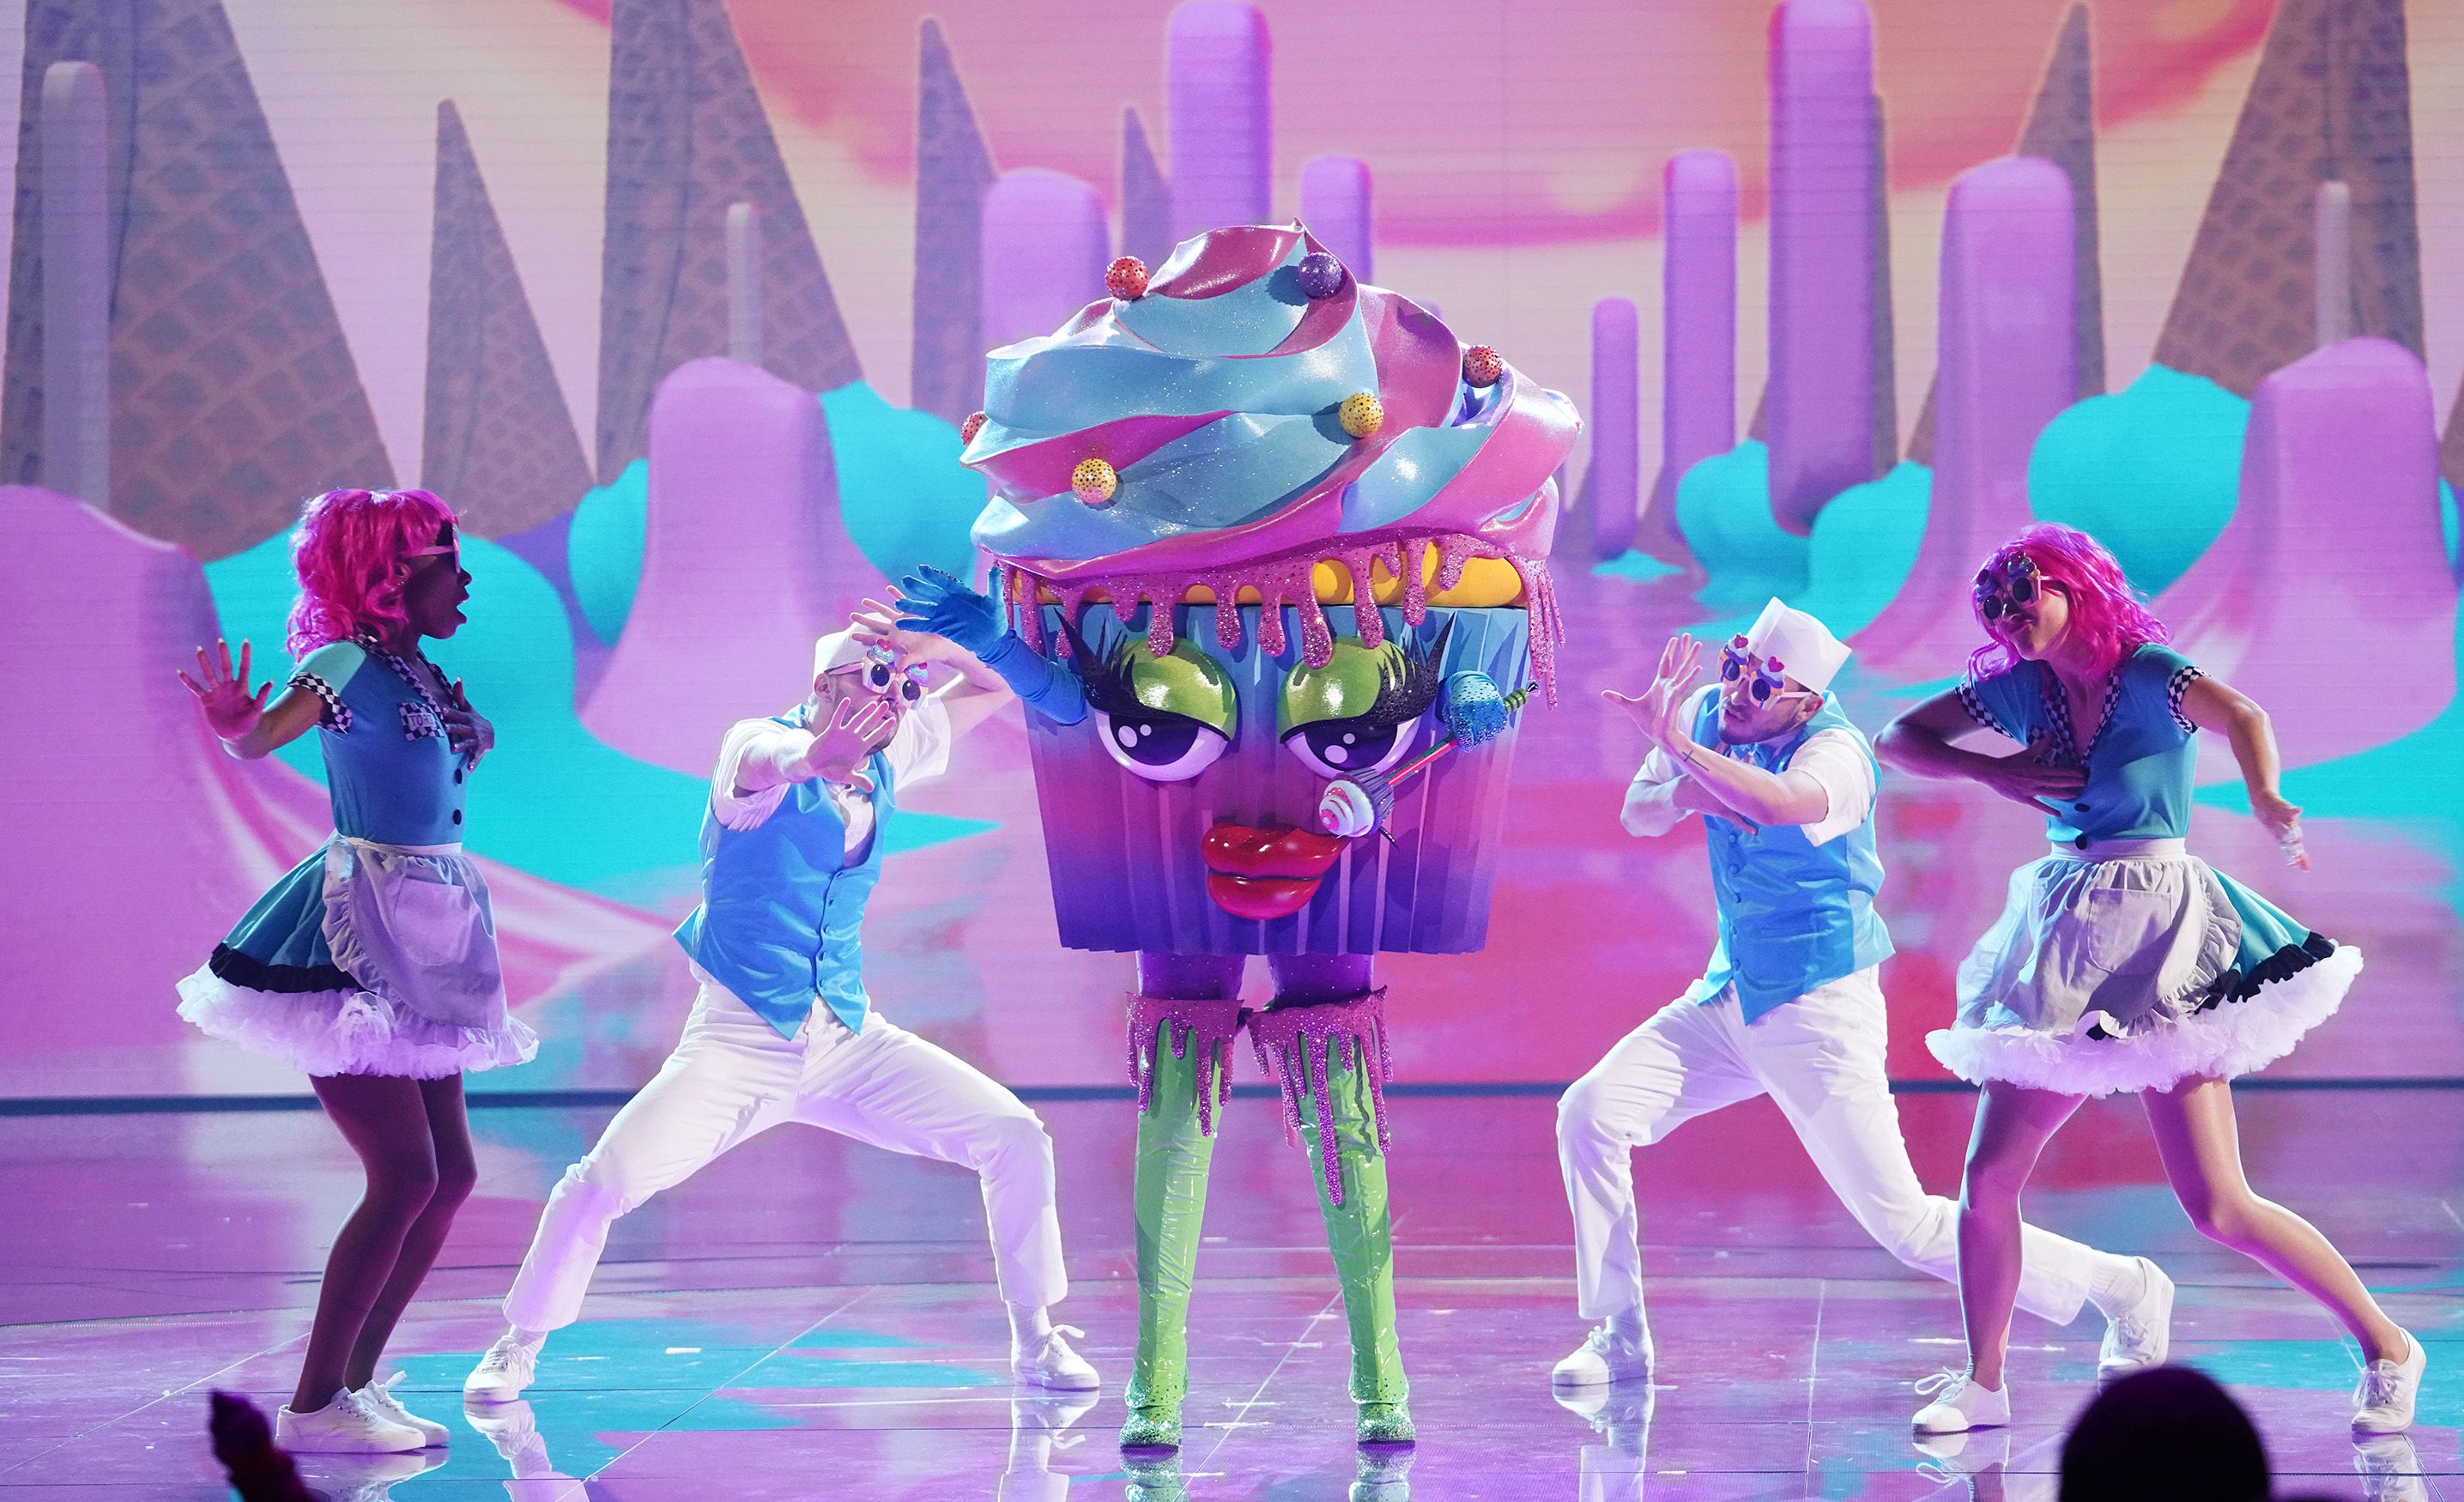 The Masked Singer identity of the cupcake, pictured here, is debated